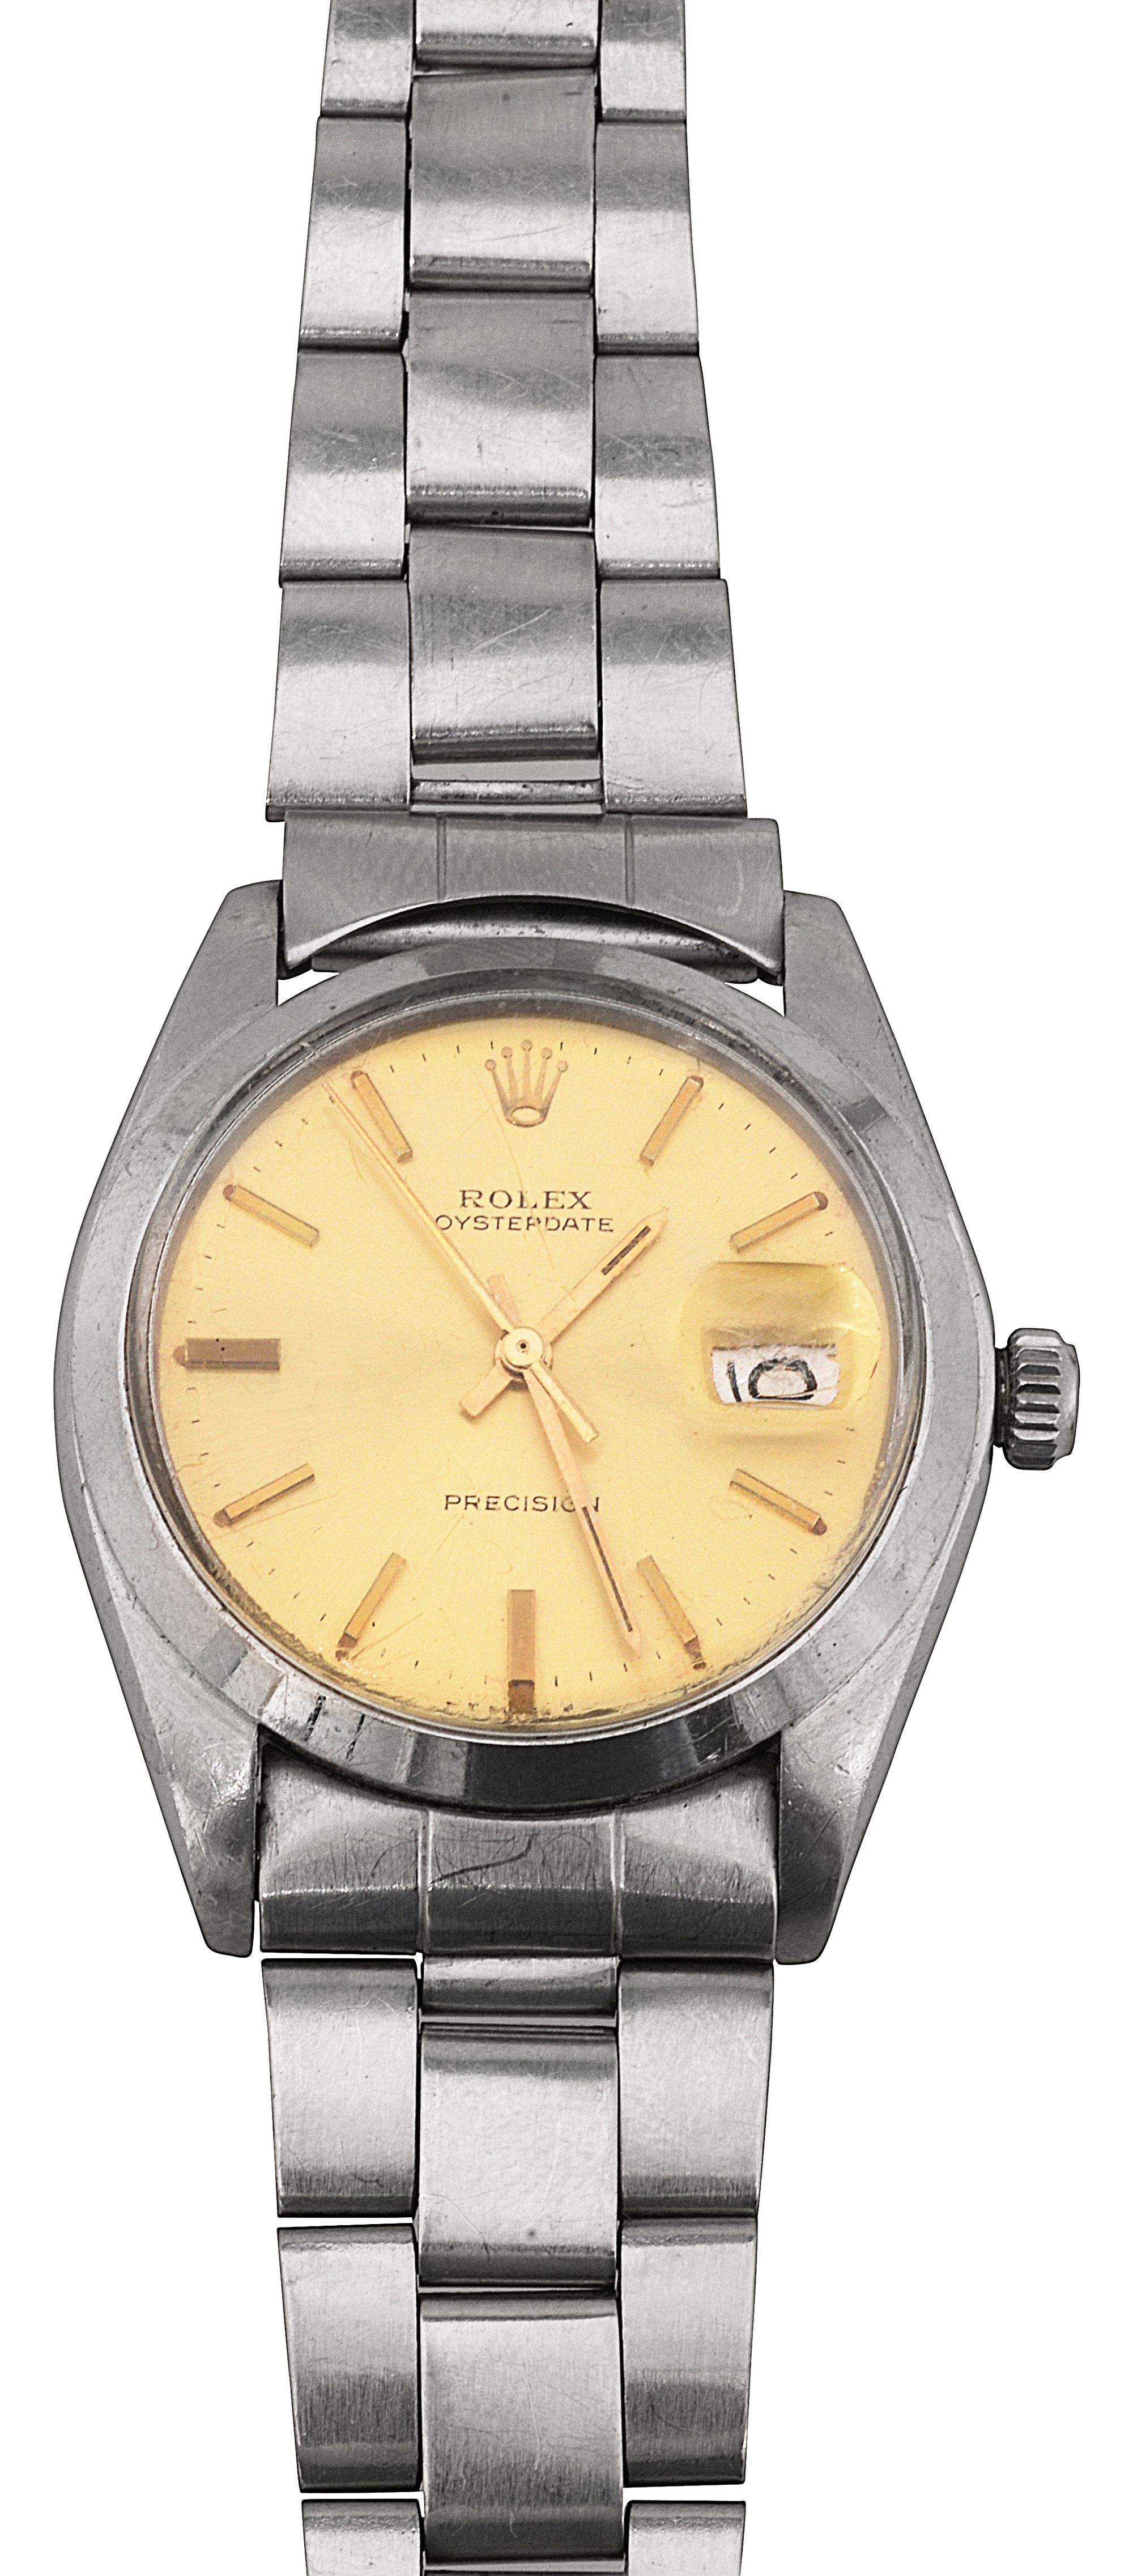 A 1970s Rolex Oysterdate Precision stainless steel watch - Image 2 of 3